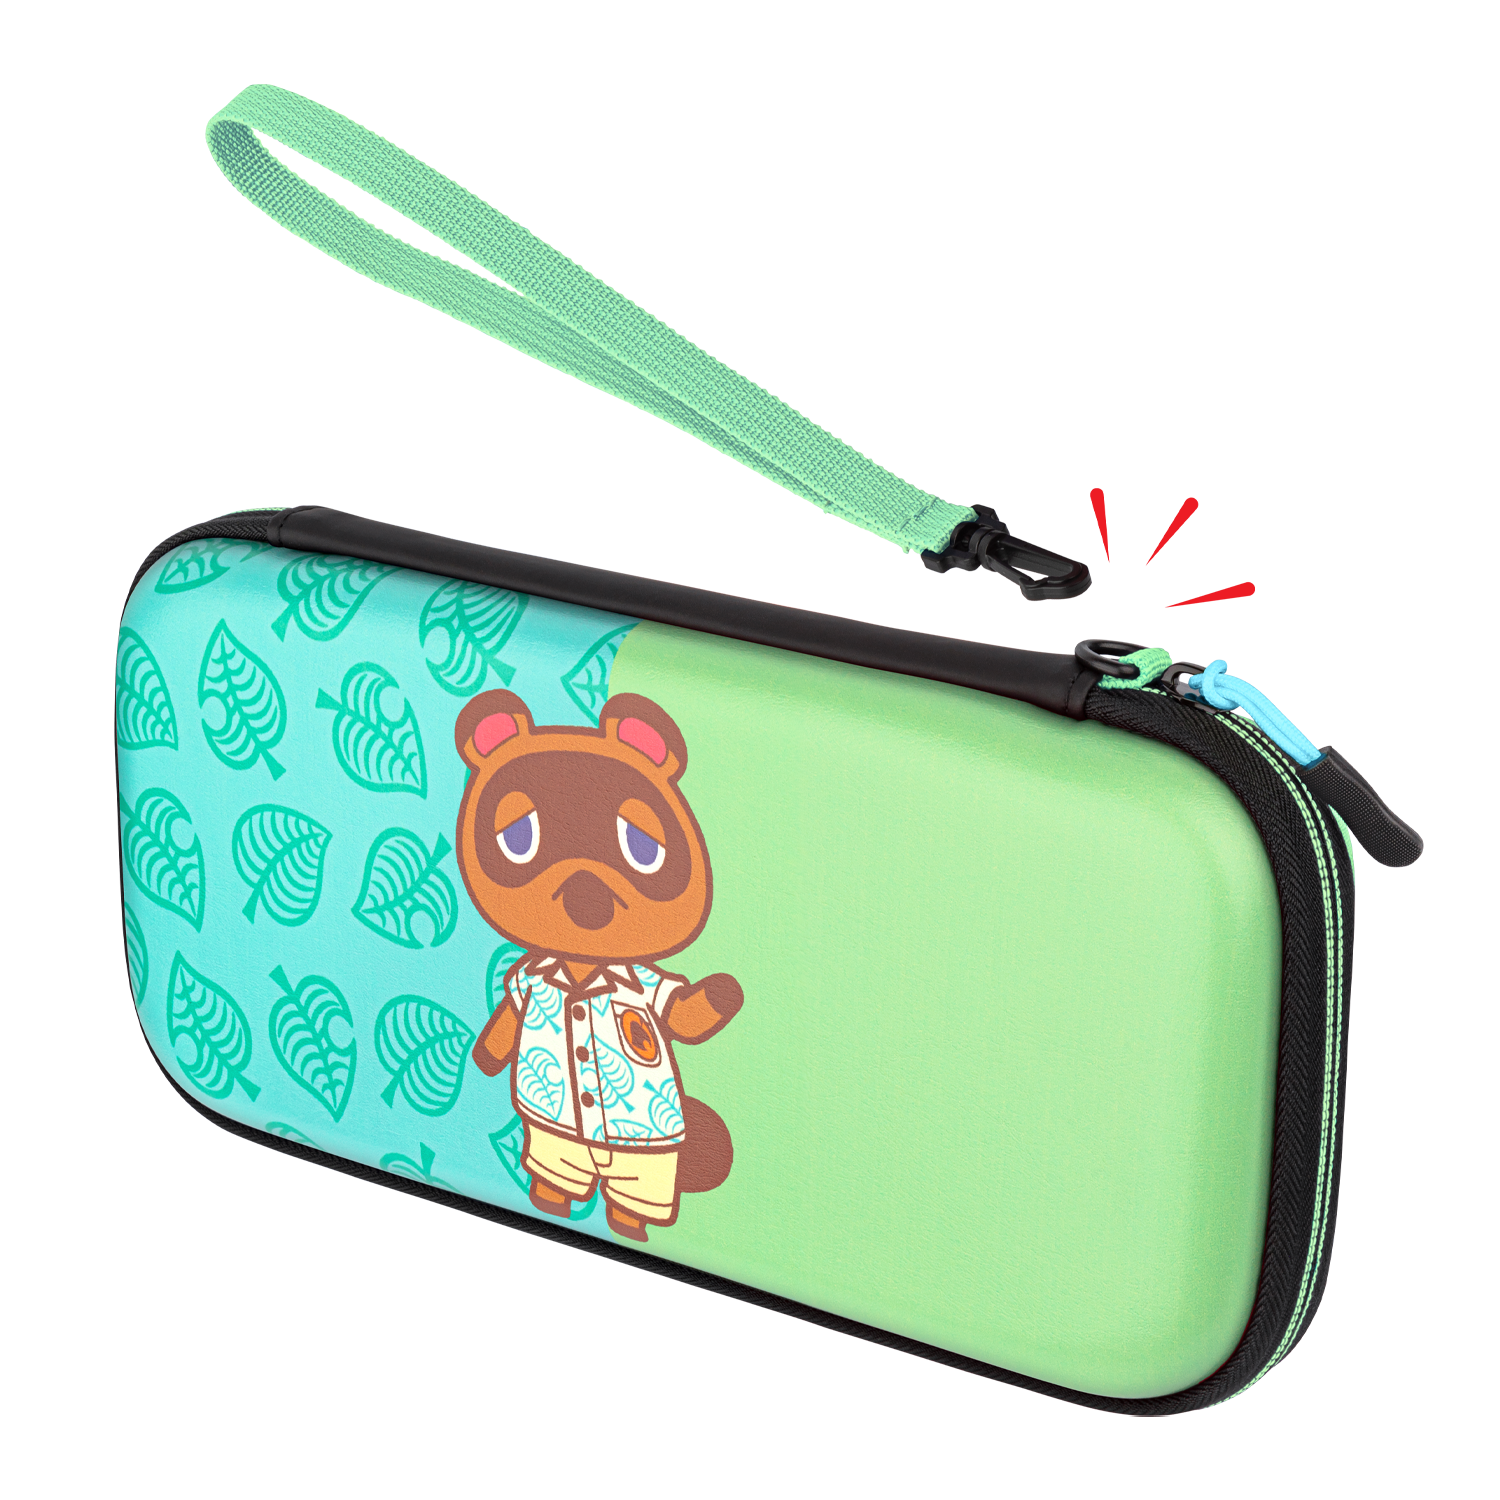 PDP Slim Deluxe Travel Case Animal Crossing Tom Nook for Nintendo Switch, Nintendo Switch Lite, and Nintendo Switch - OLED Model